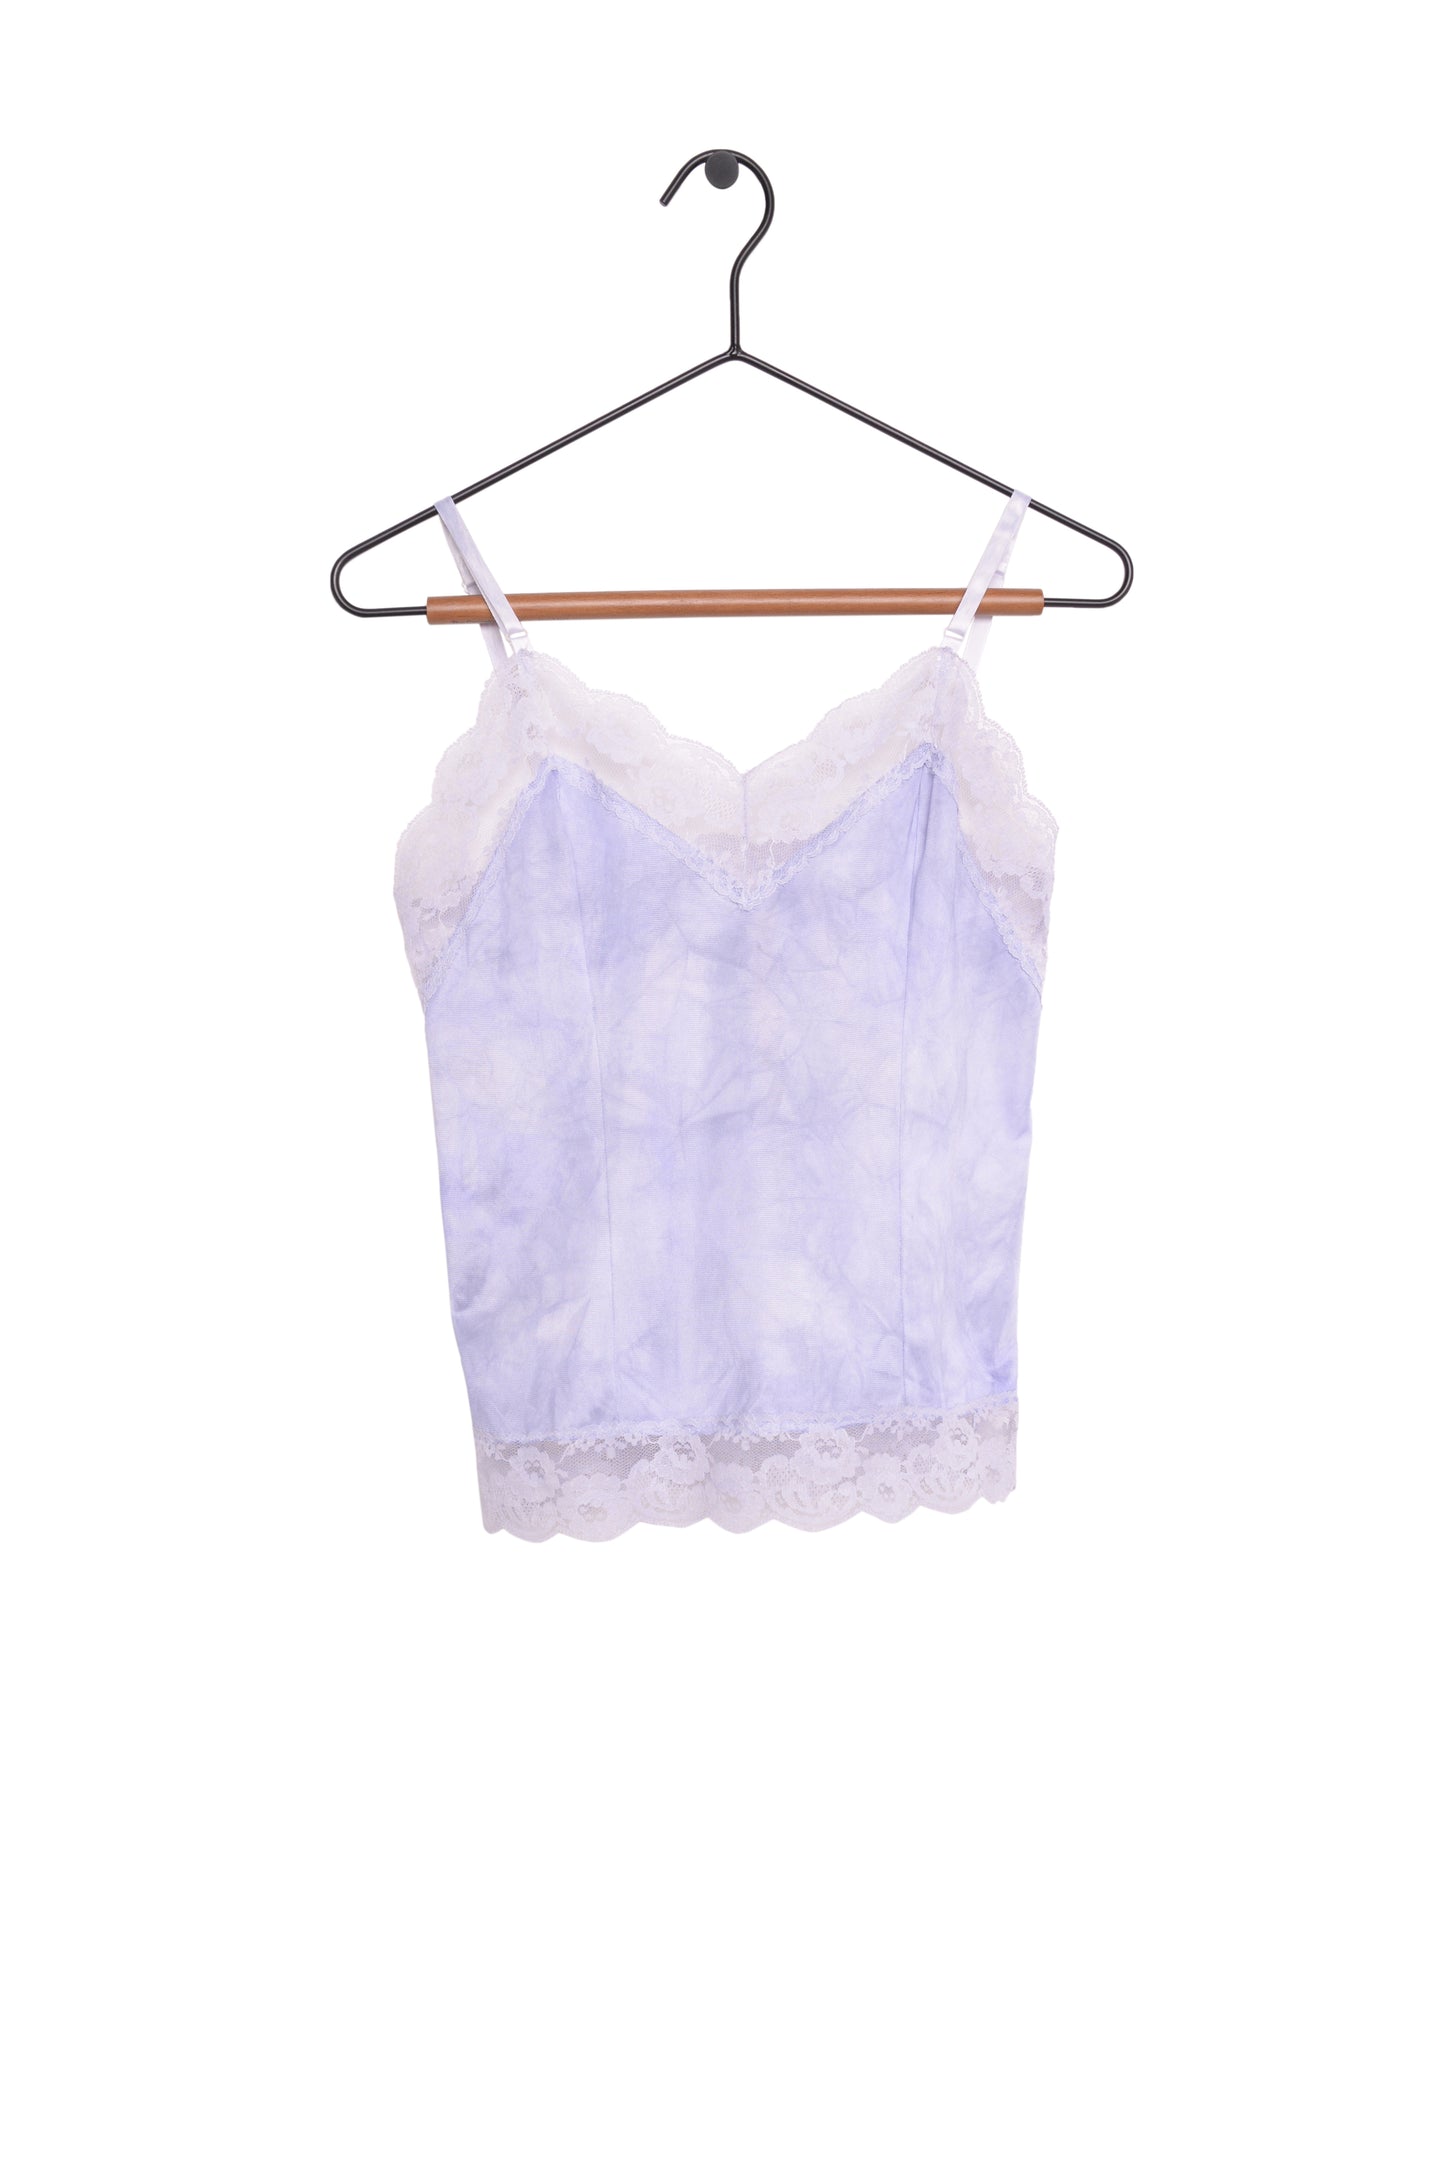 1980s Hand-Dyed Slip Top USA